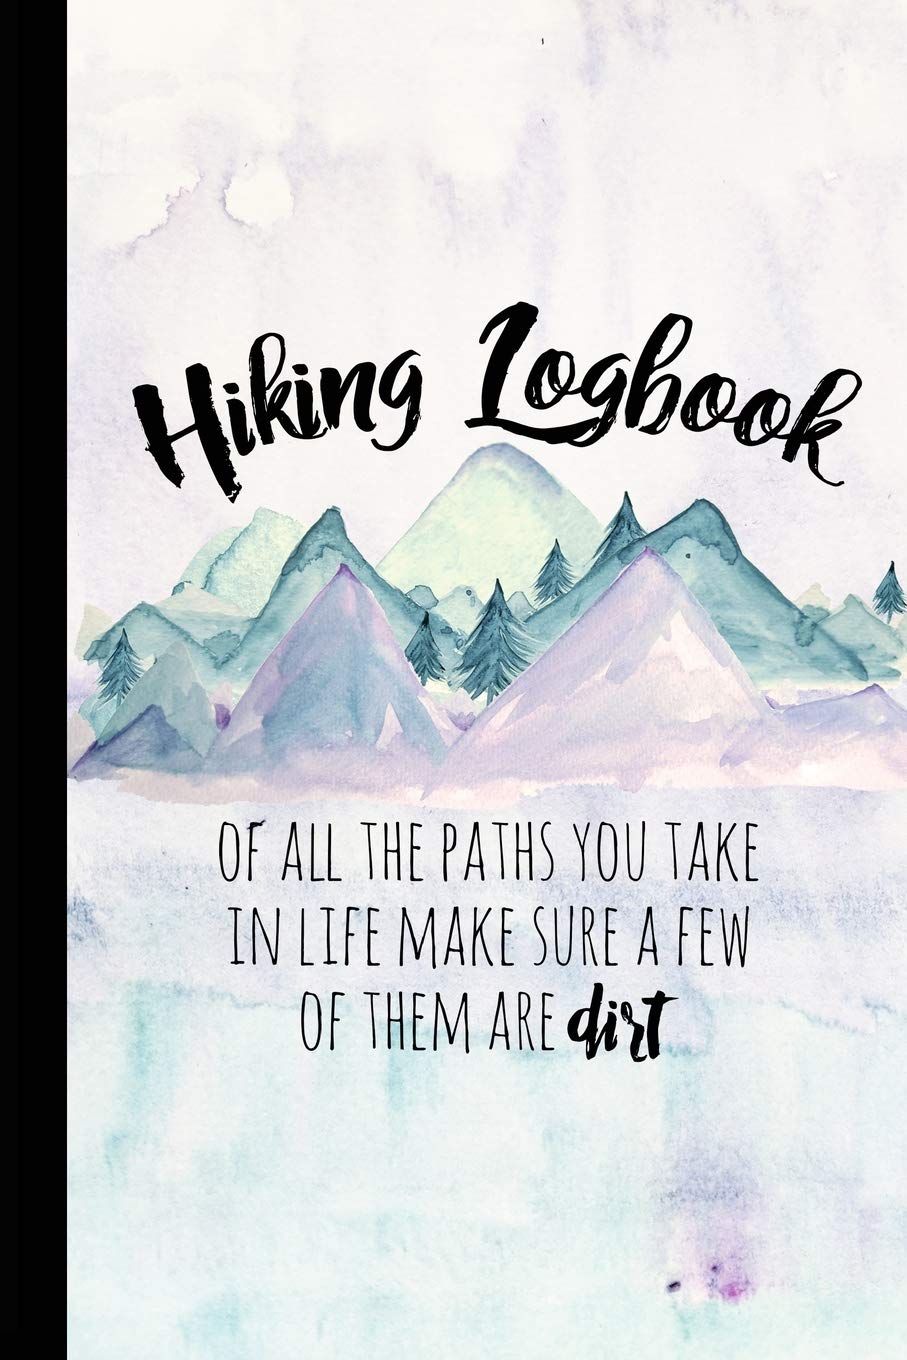 Hiking Logbook: Hiking Journal With Prompts To Write In, Trail Log Book, Hiker's Journal, Hiking Journal, Hiking Log Book, Hiking Gifts, 6" x 9" Travel Size (Hiking Logbooks & Journals)